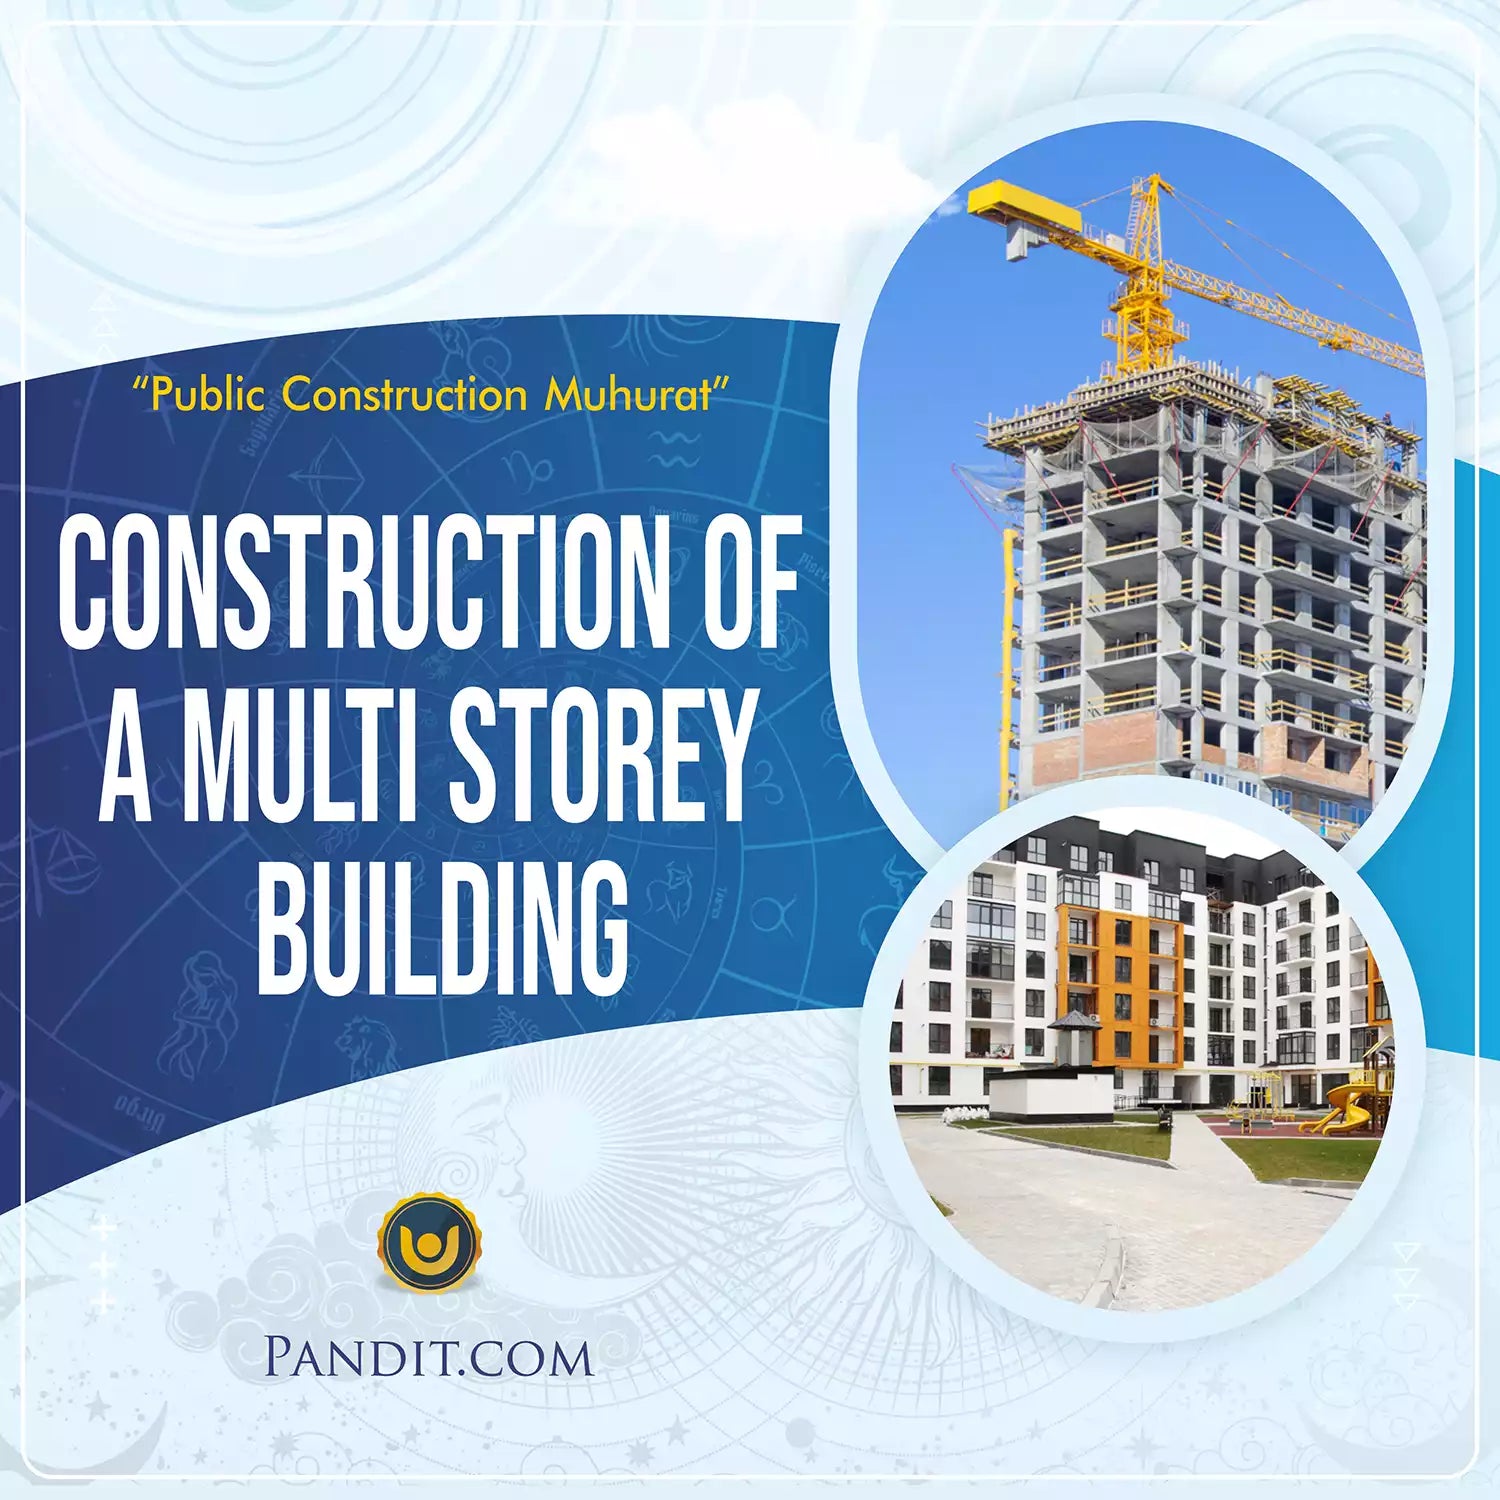 Construction of a Multi Storey Building